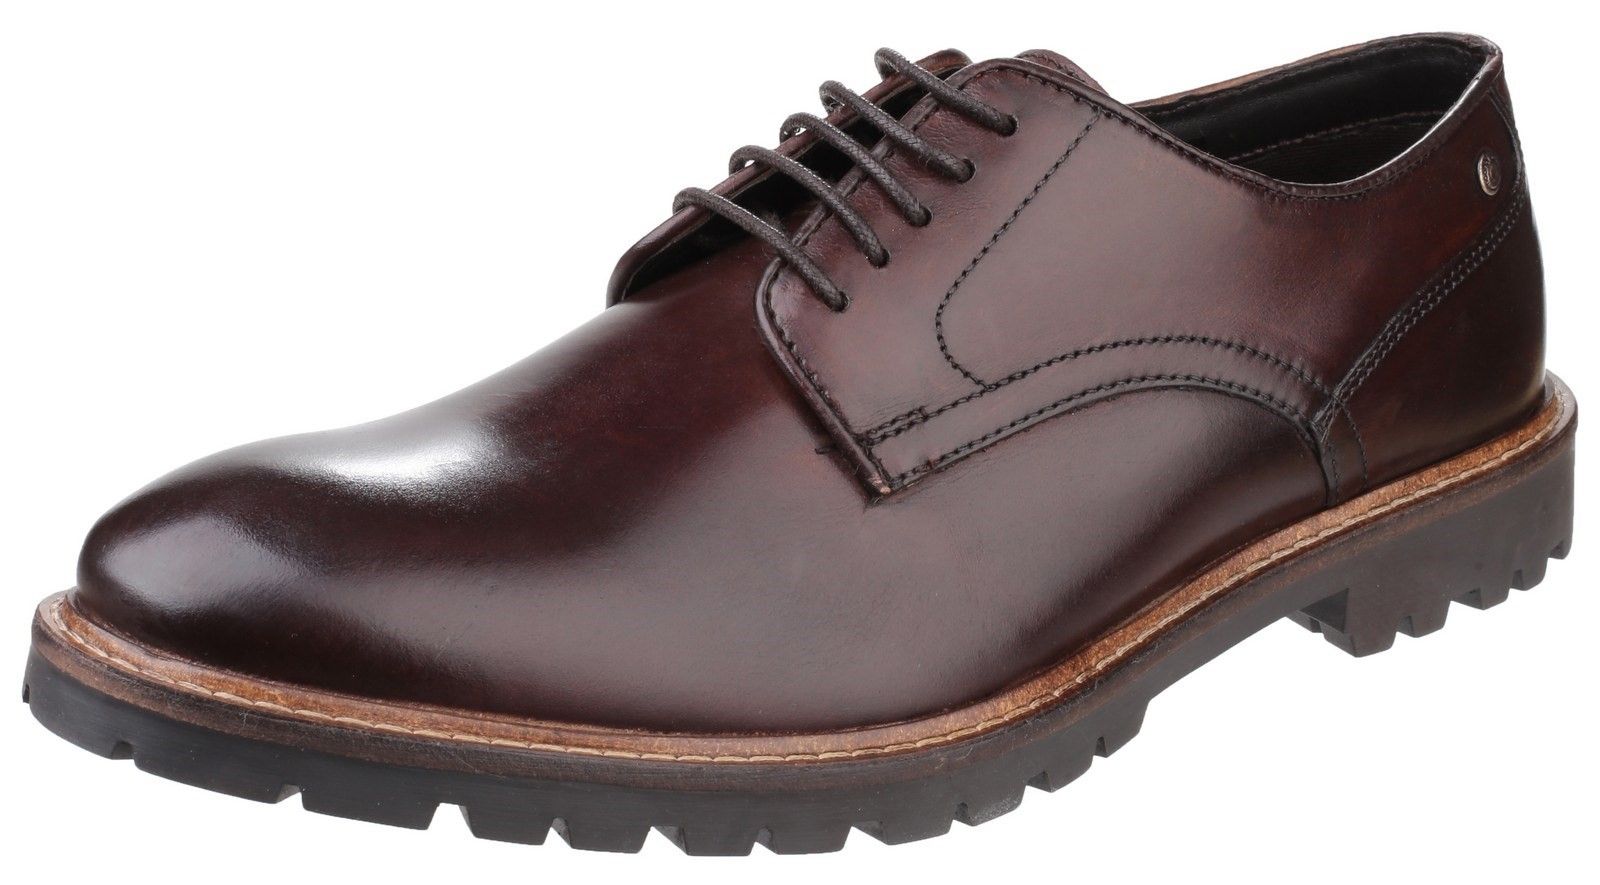 Make a confident statement with this Base London Barrage Derby shoe. With mixed leather uppers and contrast stitching around the commando style sole, it's a confident shoe that offers comfort and versatility. Plain toe derby. 
Cleeted commando sole. 
Comfortable with good grip.